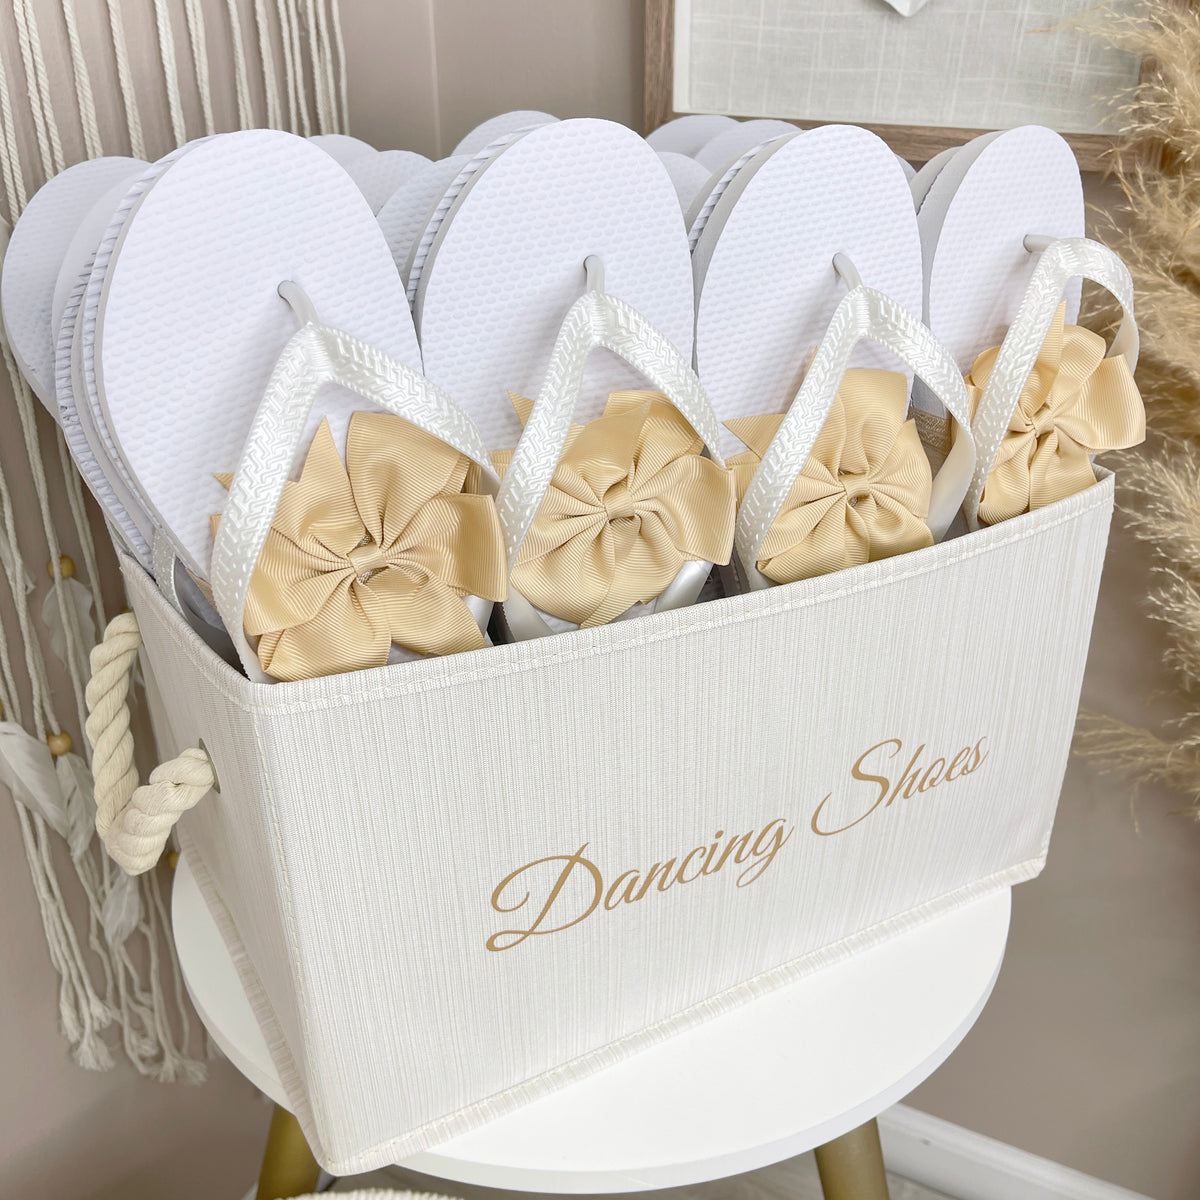 Creating a flip flop basket for my wedding guests